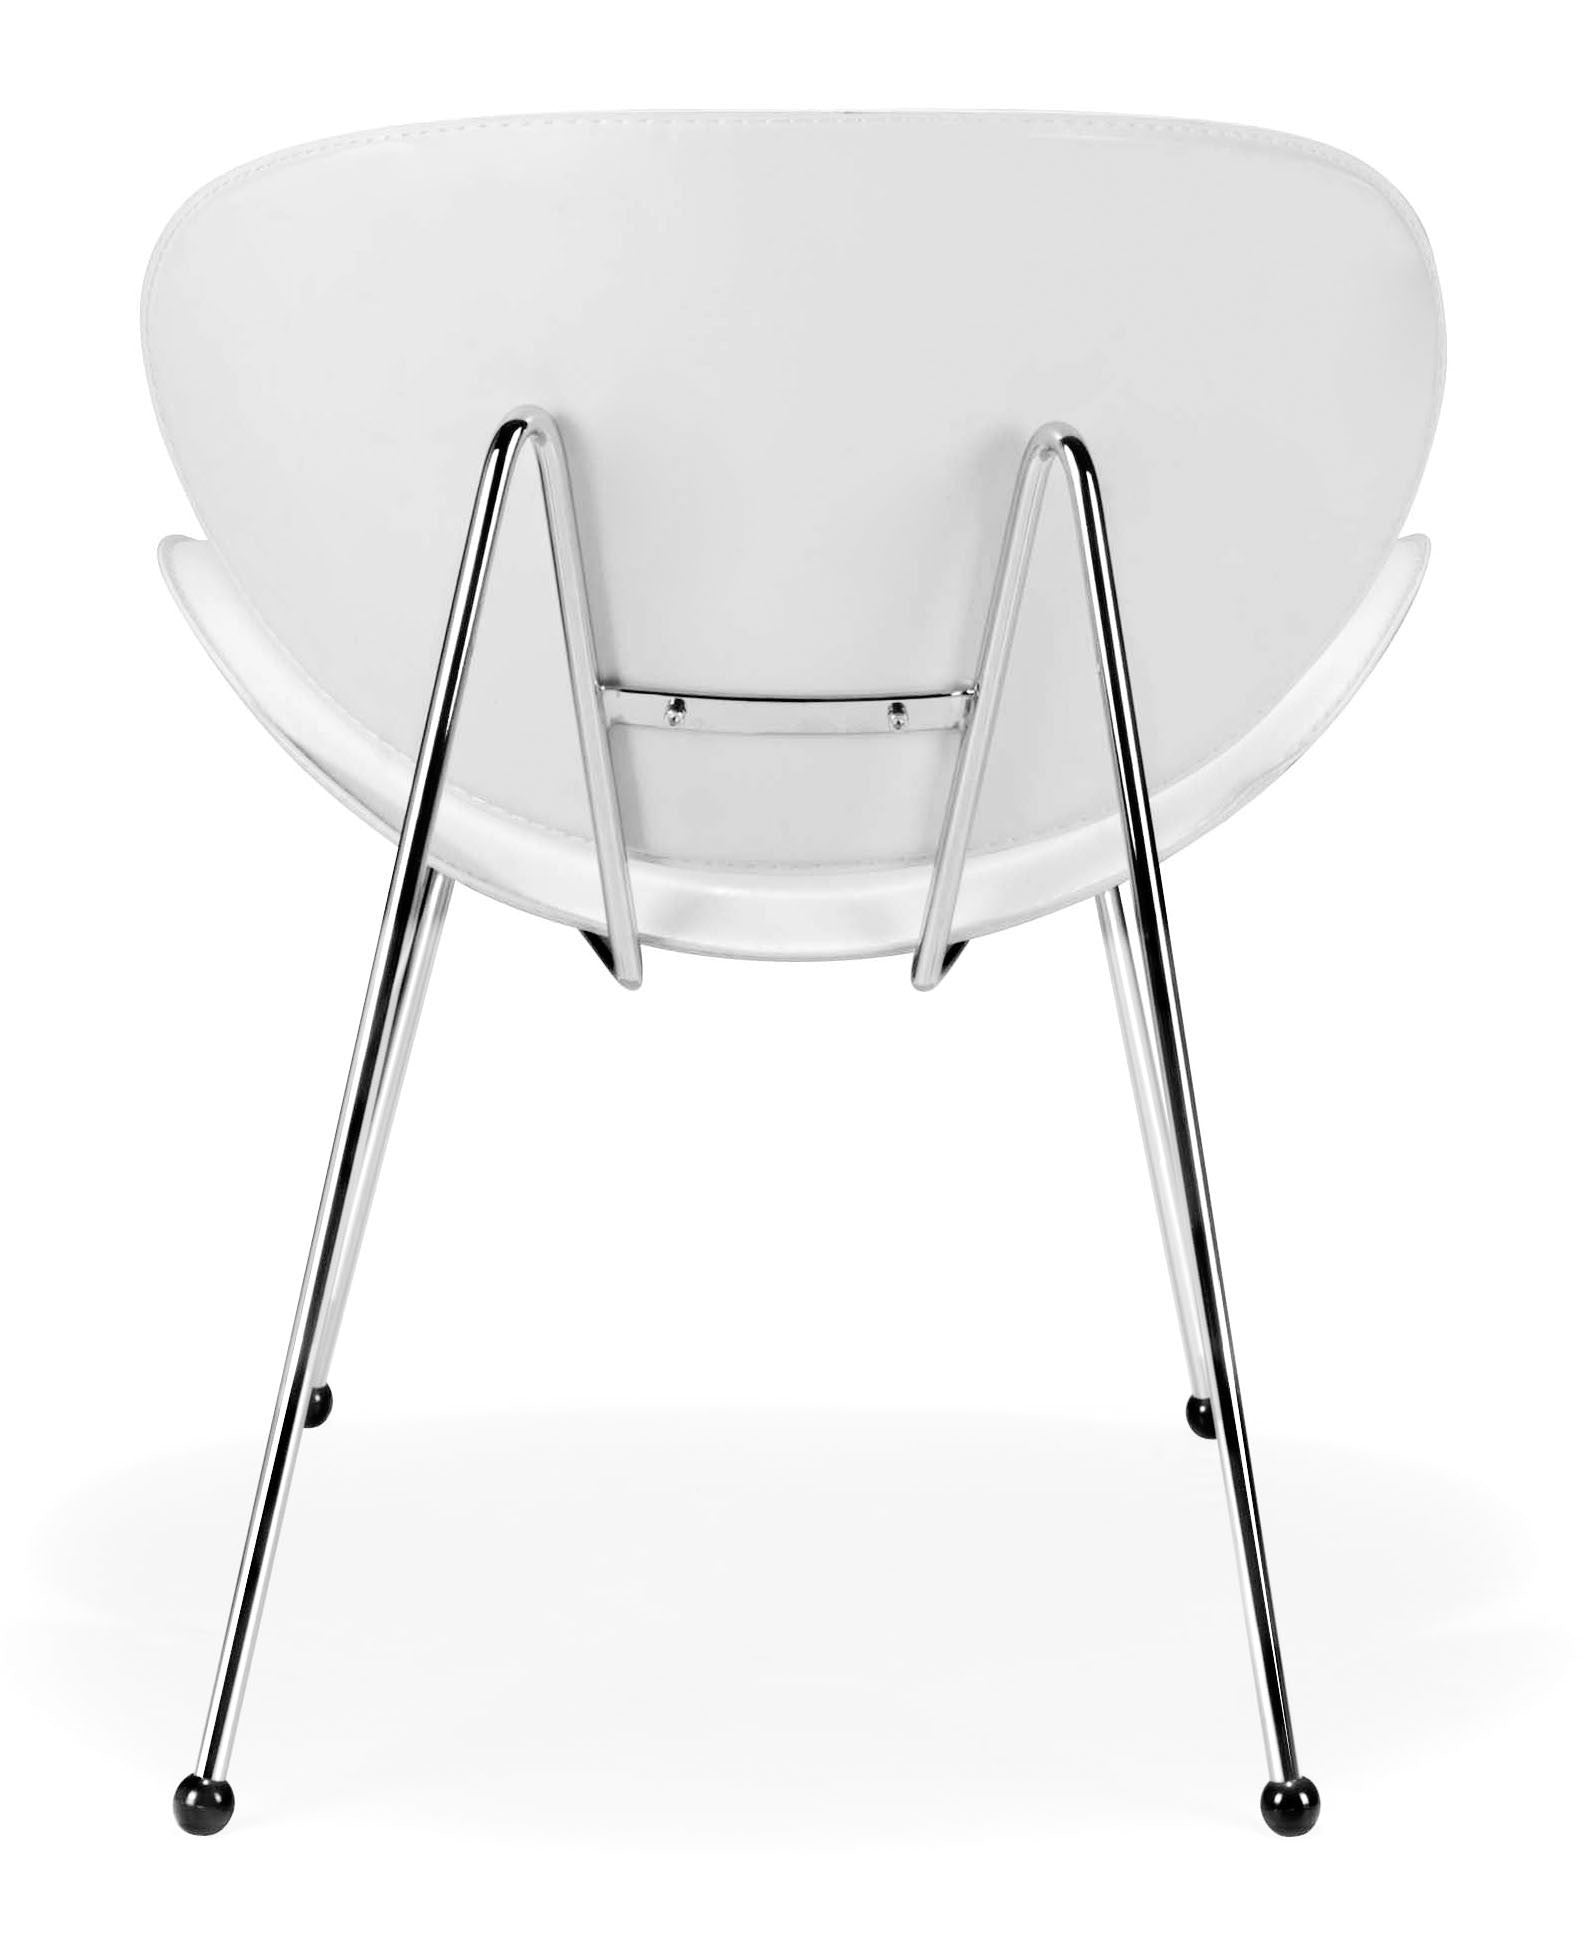 Middlefield Lounge Chair White (Set of 2)